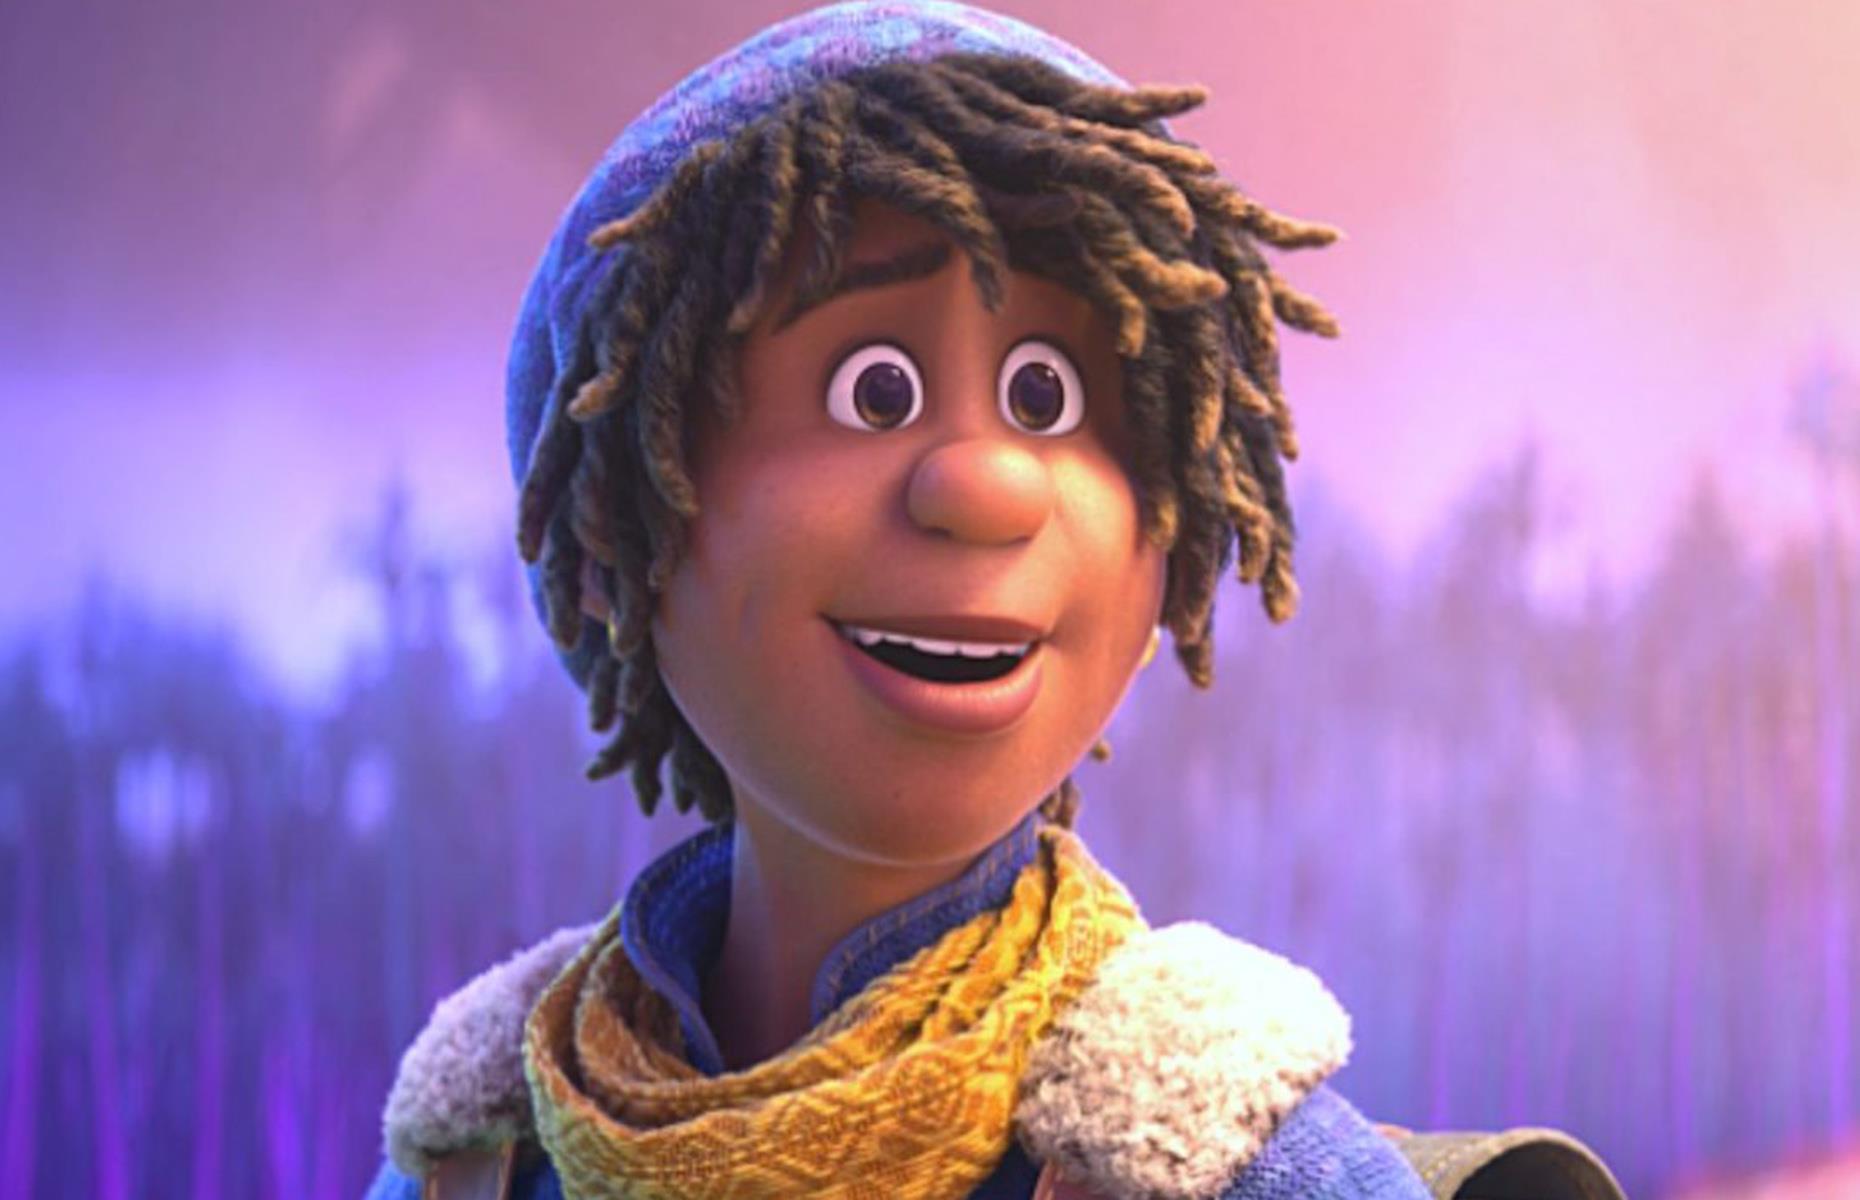 <p>Disney's animated sci-fi adventure flick <em>Strange World</em> landed in cinemas in November 2022. It boasted the star power of Jake Gyllenhaal and Gabrielle Union, while sources suggest its budget was somewhere between $120 million and $180 million. </p>  <p>Despite having the basic ingredients for box office success, <em>Strange World</em> tanked, grossing just $73 million worldwide. A string of negative reviews and stiff competition from another Disney release, <em>Black Panther: Wakanda Forever</em>, contributed to its disappointing performance.</p>  <p>Overall, sources estimate this box-office bomb cost Disney as much as $377 million.  </p>